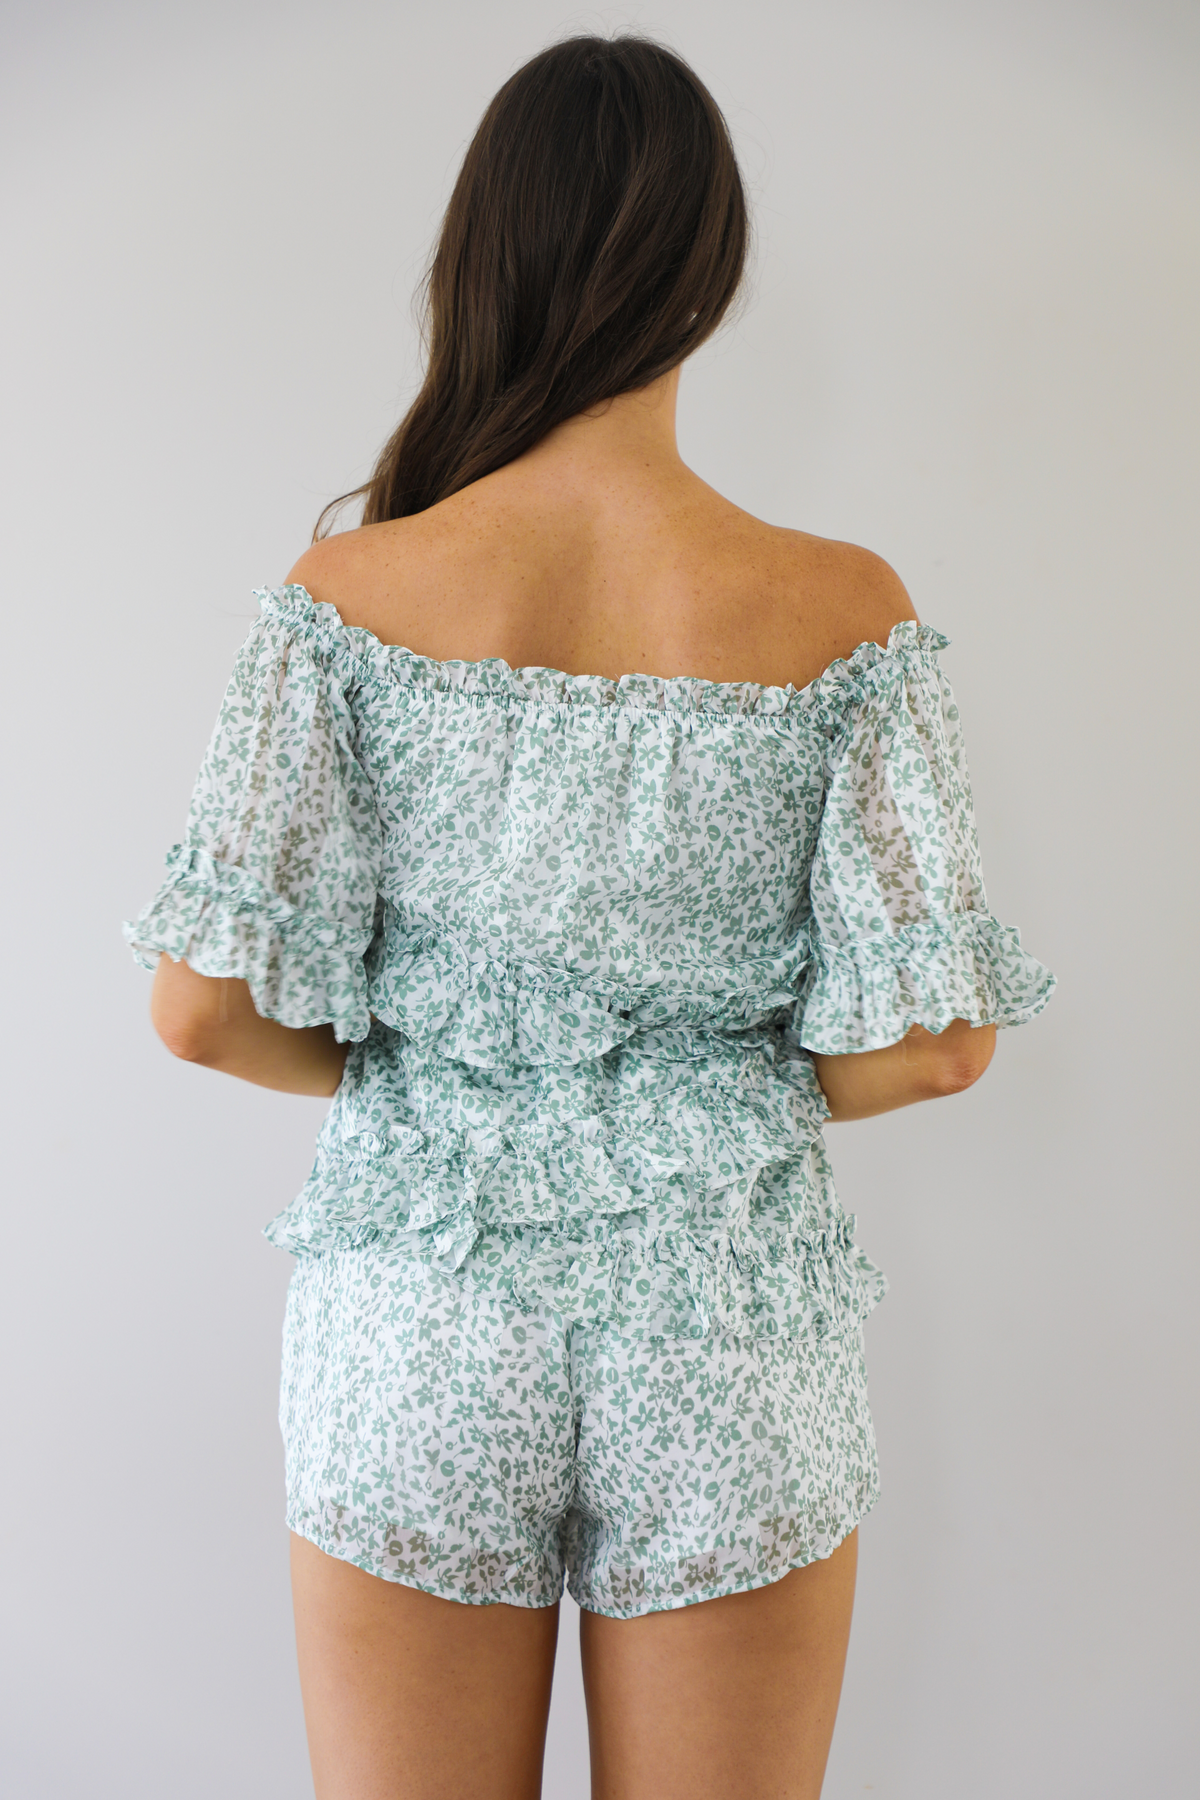 One And Only Romper: Teal/Ivory